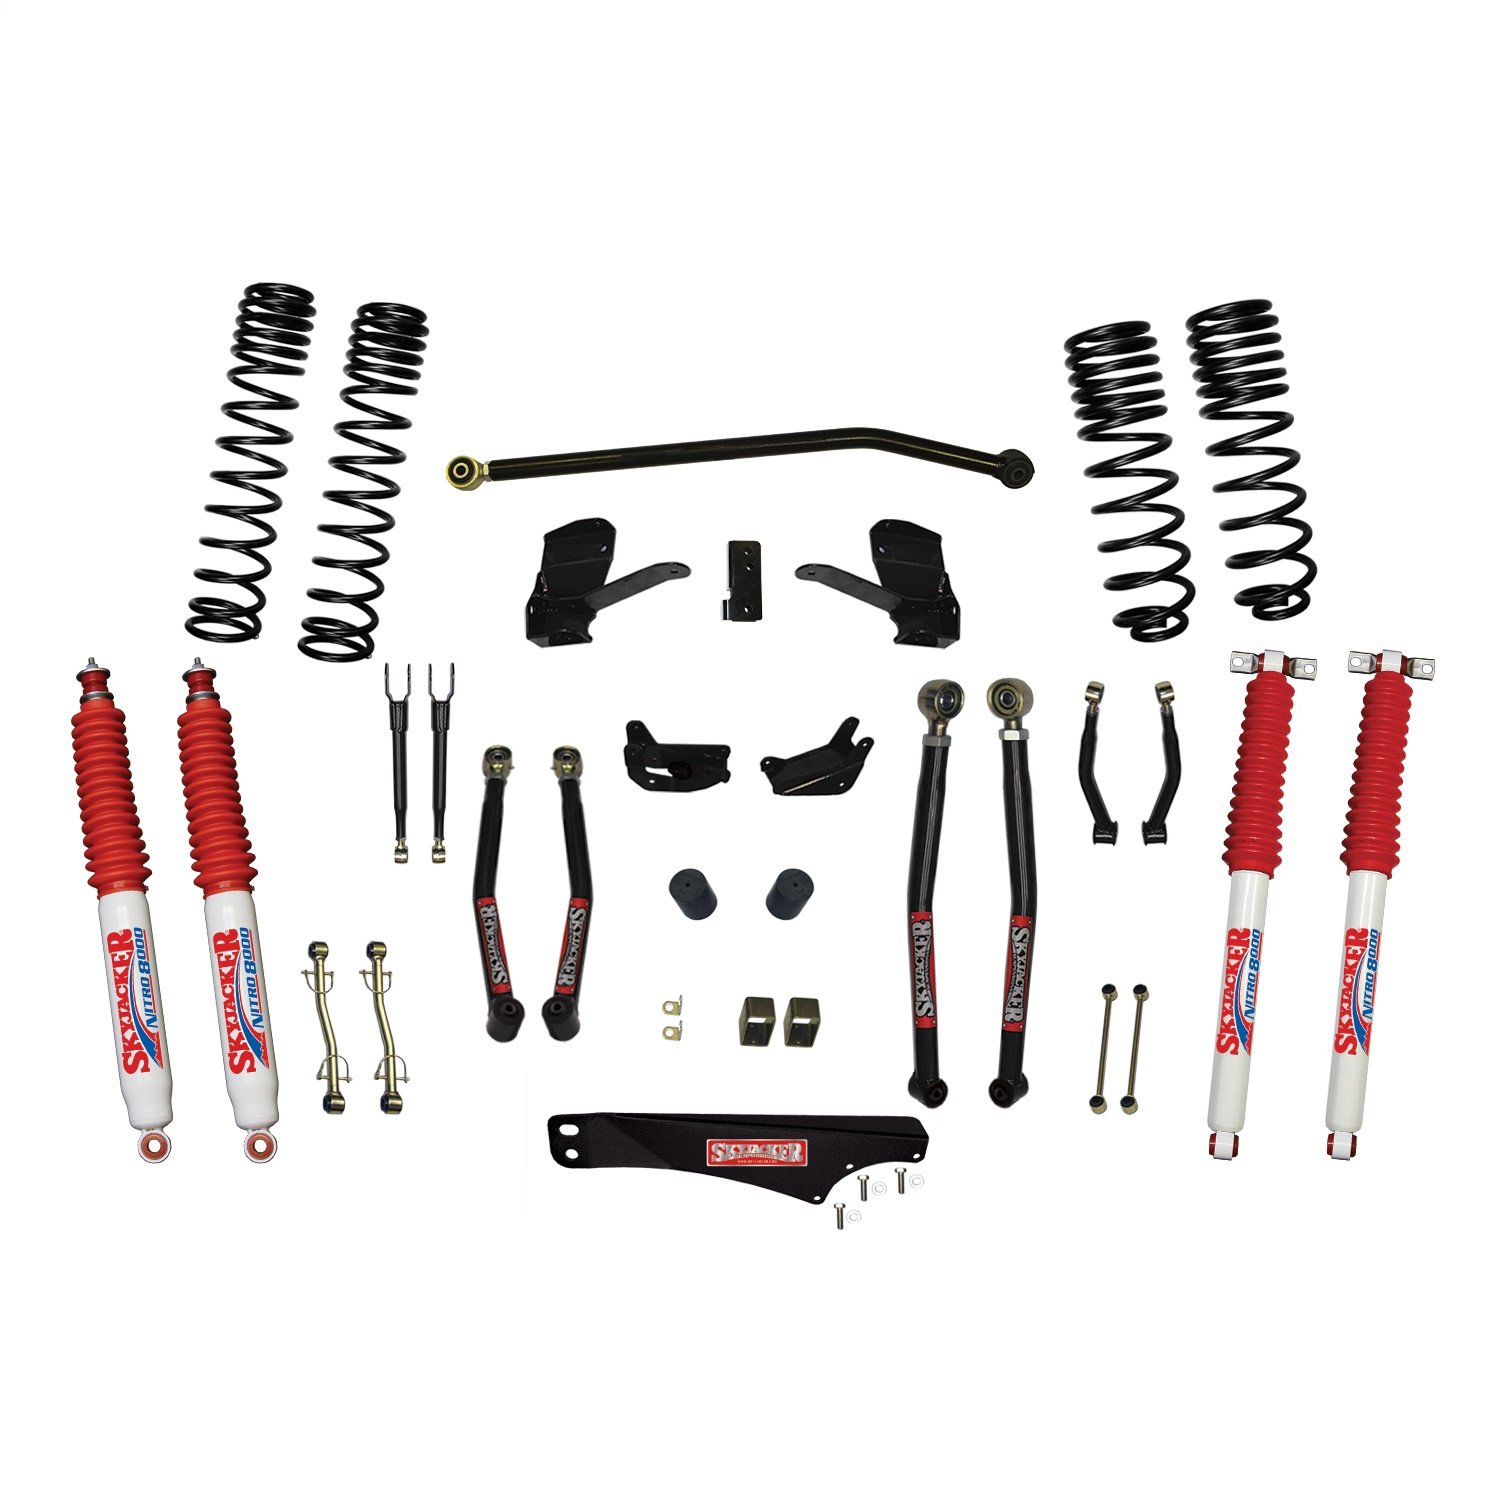 JK40LKLT-SXN Front and Rear Suspension Lift Kit, Lift Amount: 4 in. Front/4 in. Rear